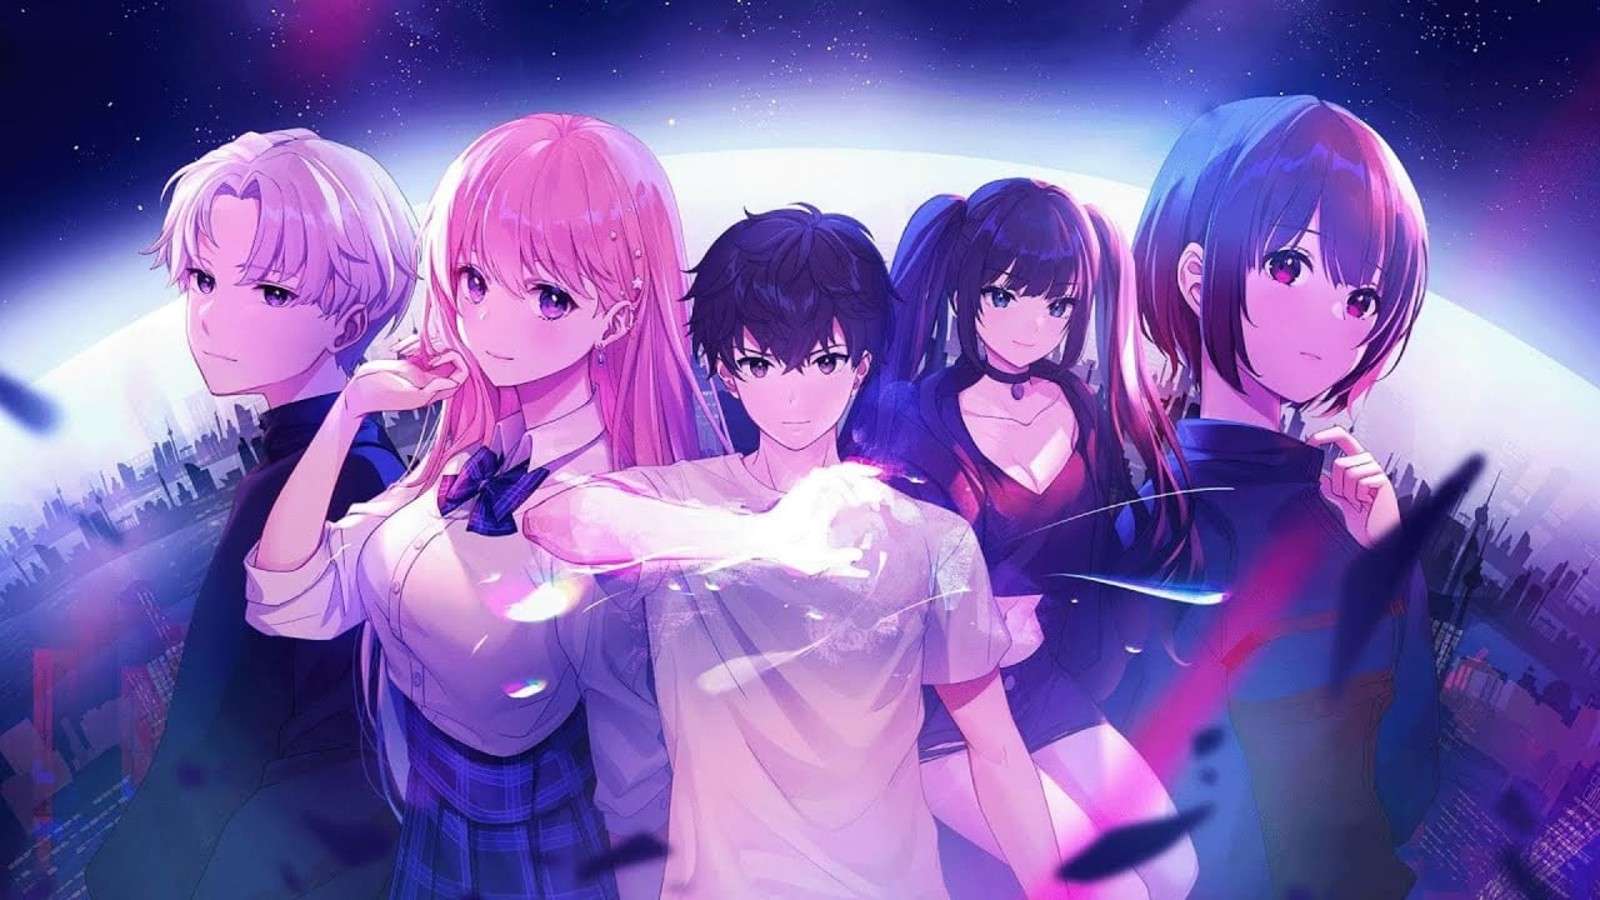 An image of the official key art for Eternights featuring all the main characters.